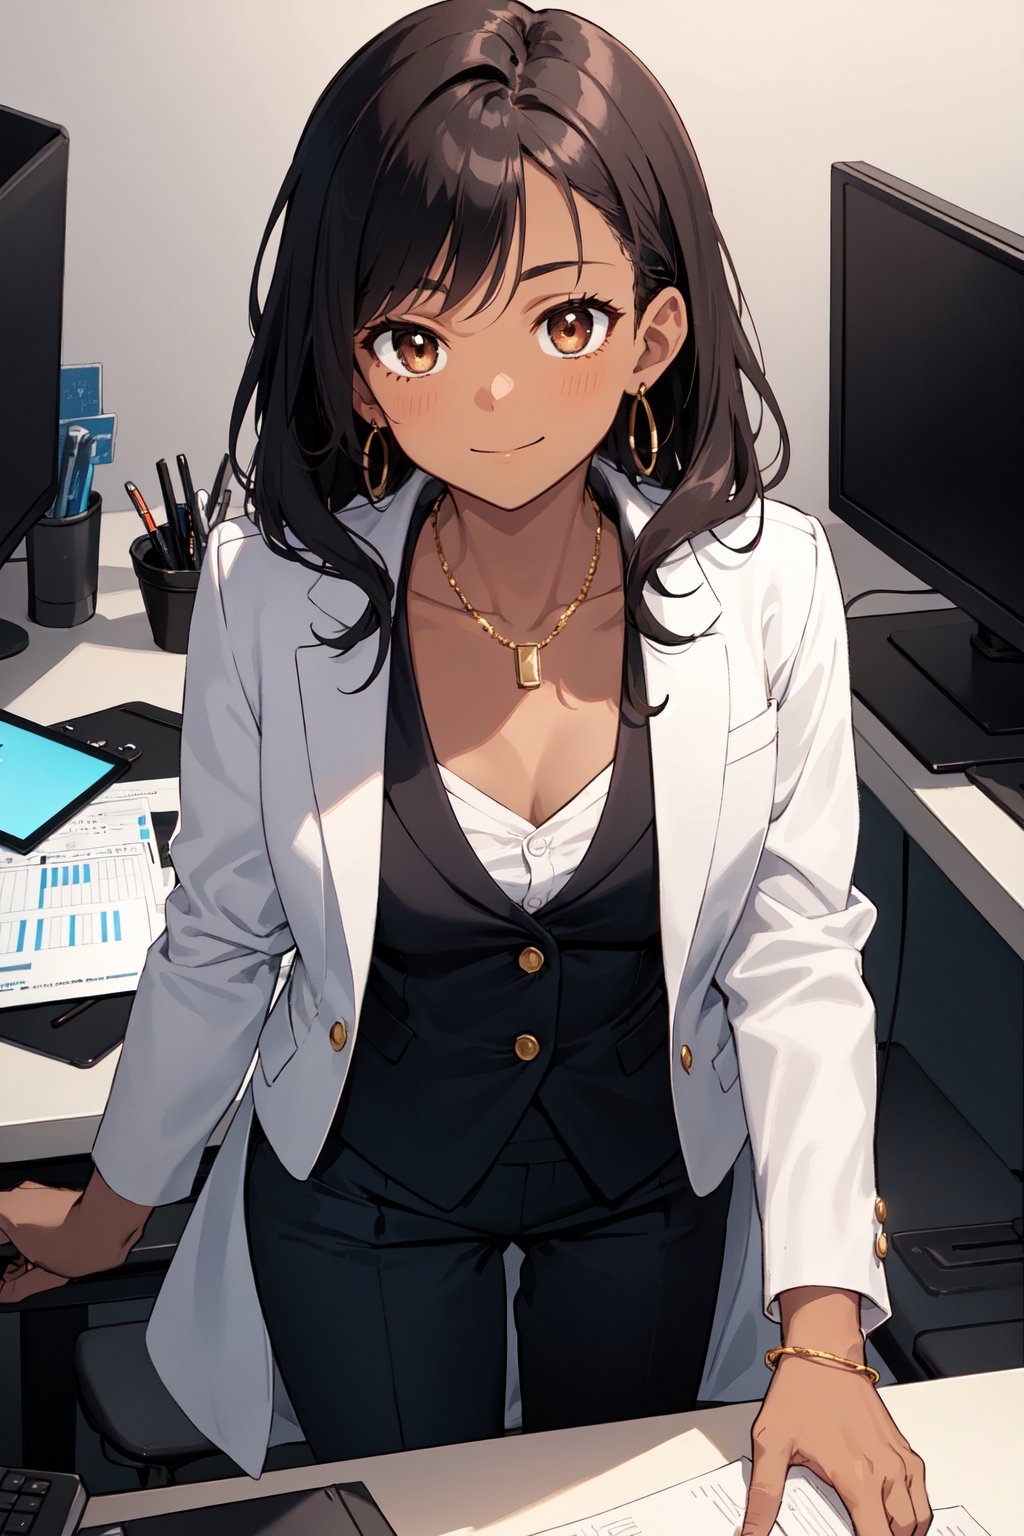 1girl, adult female, adult woman, dark black hair, curly hair, (dark skin), ((dark indian skin)), dark brown skin, (best quality),(brown eyes), adult woman, round face, curvy, dangling jeweled earrings, black business suit, green button-up shirt, slacks, at office, confident businesswoman, office setting, at office, suit jacket, cleavage, gold necklace, working, office setting, at desk, black suit jacket, slight smile, confident expression, dark office, romantic lighting, girl by herself, girl alone at work

